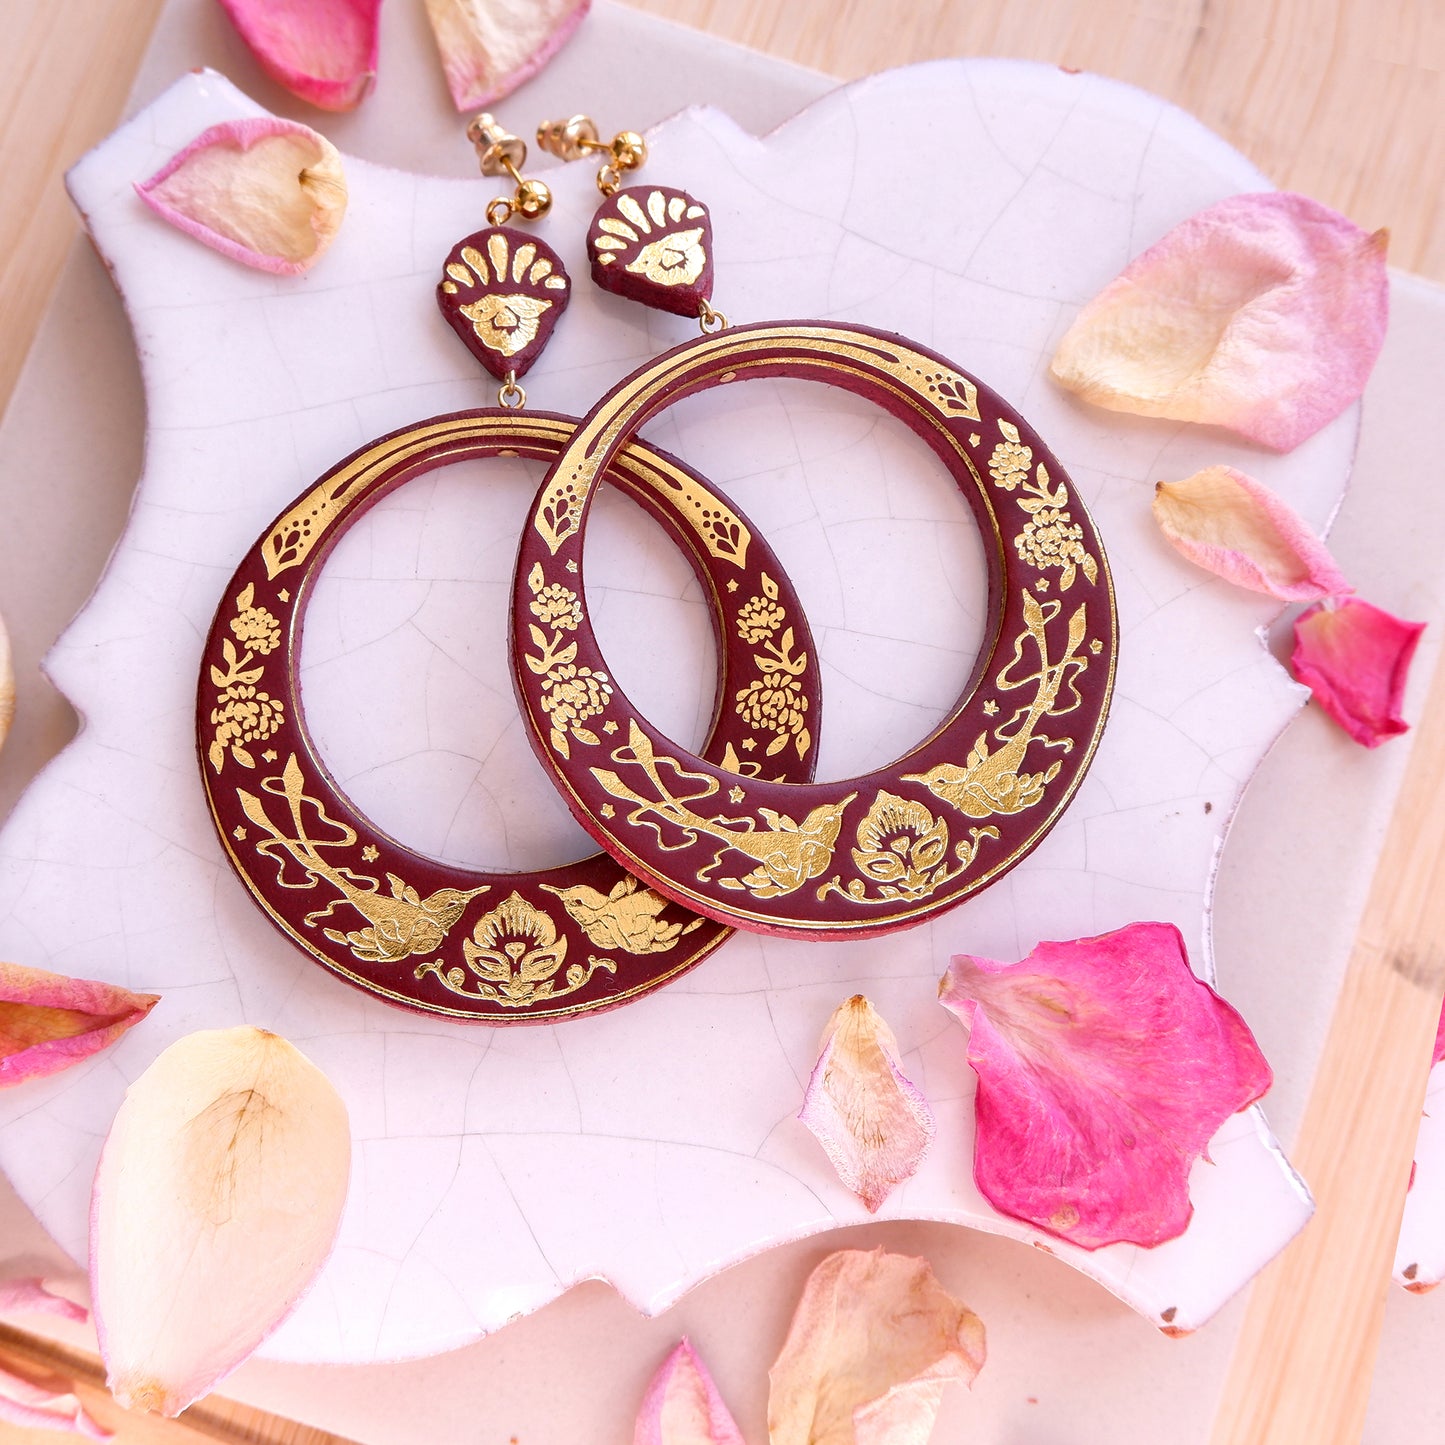 large hoops earring printed with birds & flowers in gold on  ox blood leather